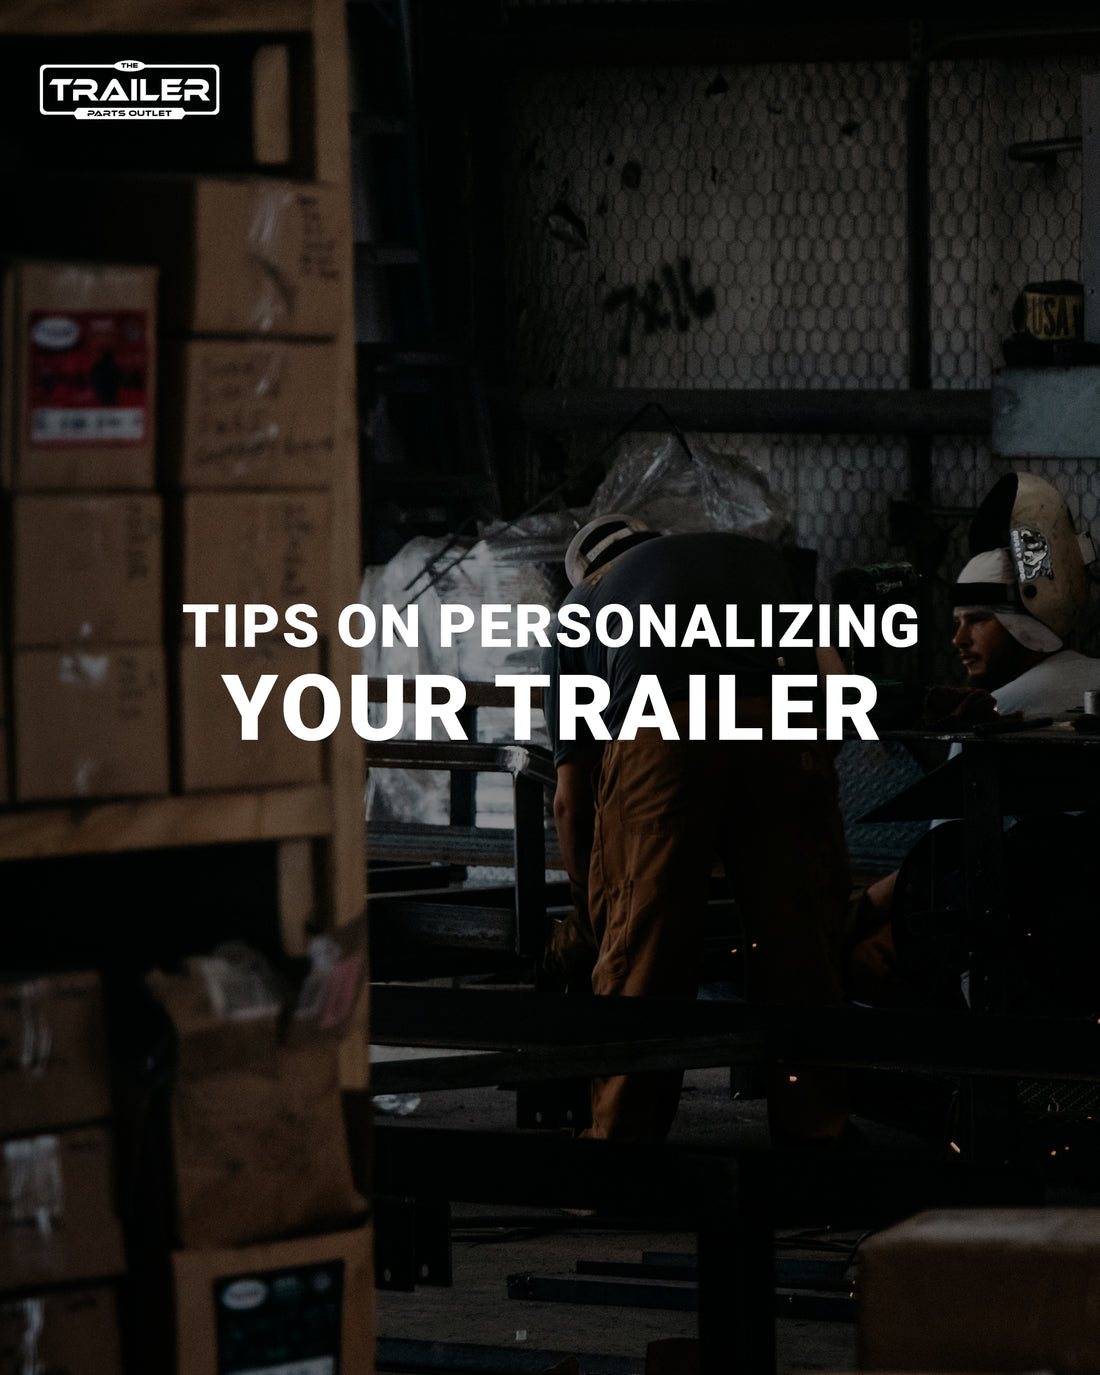 Tips on Personalizing Your Trailer with Accessories